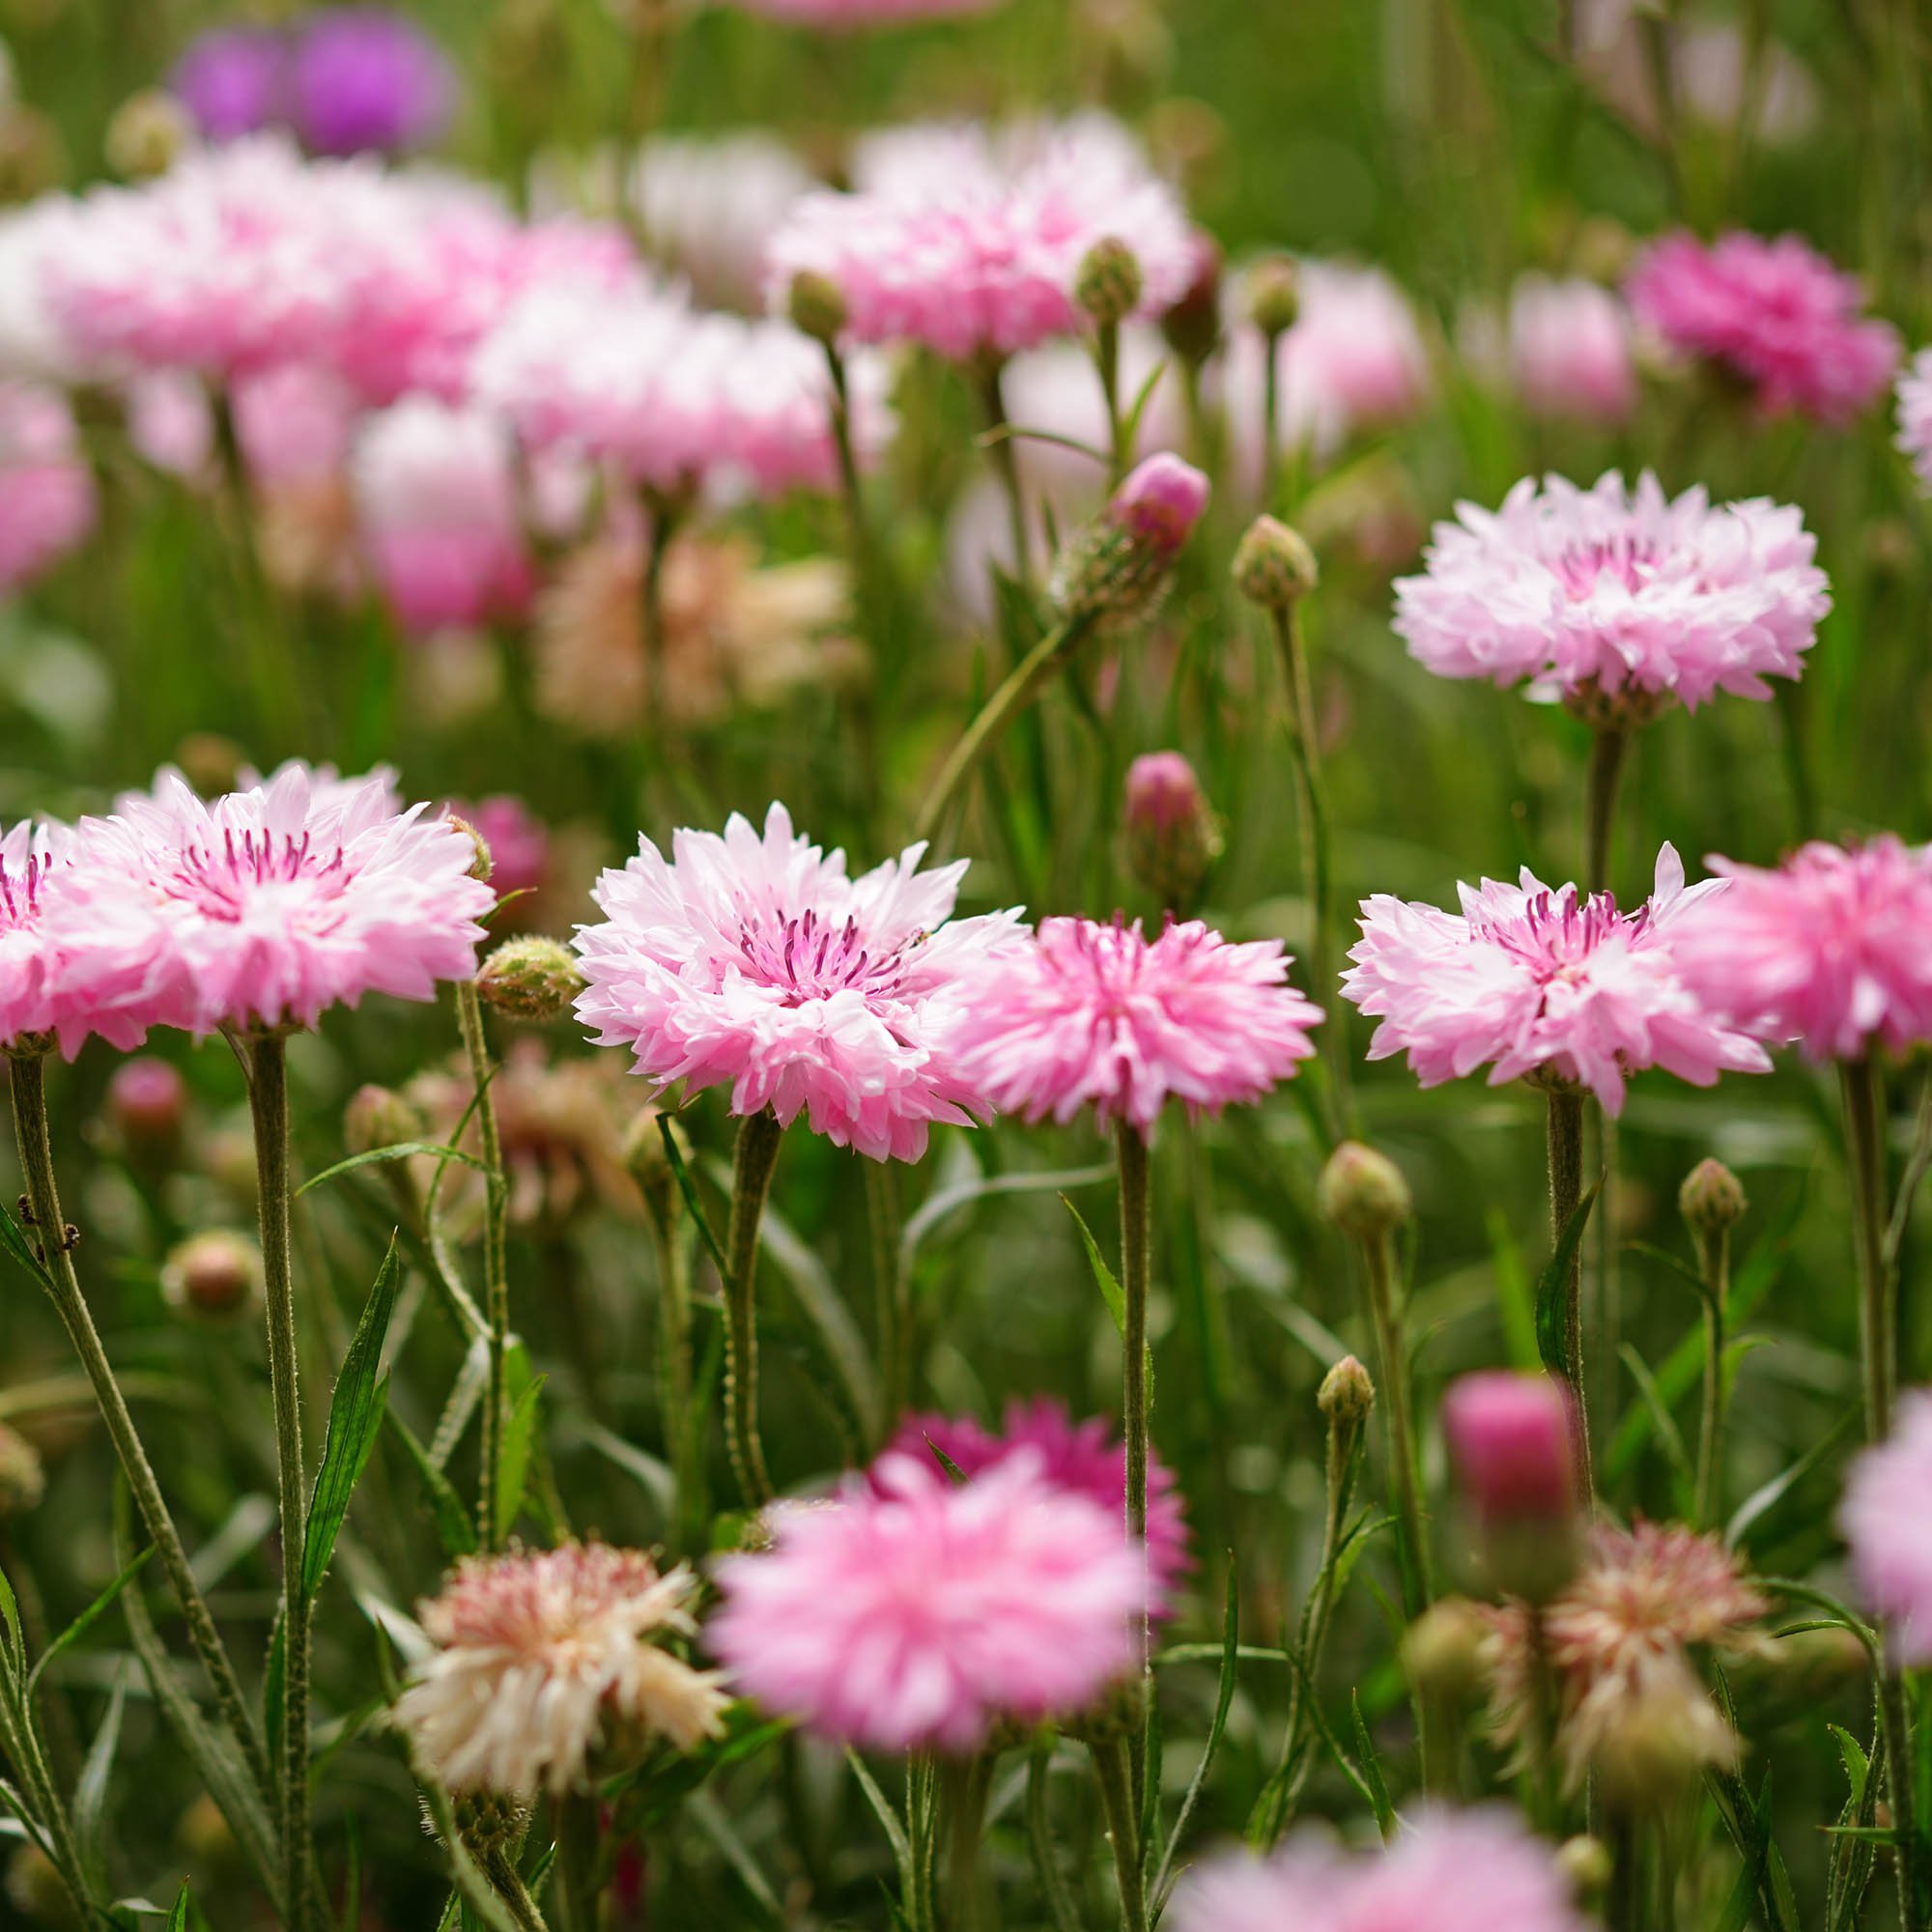 How to Grow Bachelor Buttons: 5 Tips for Growing Cornflowers - Growing In  The Garden